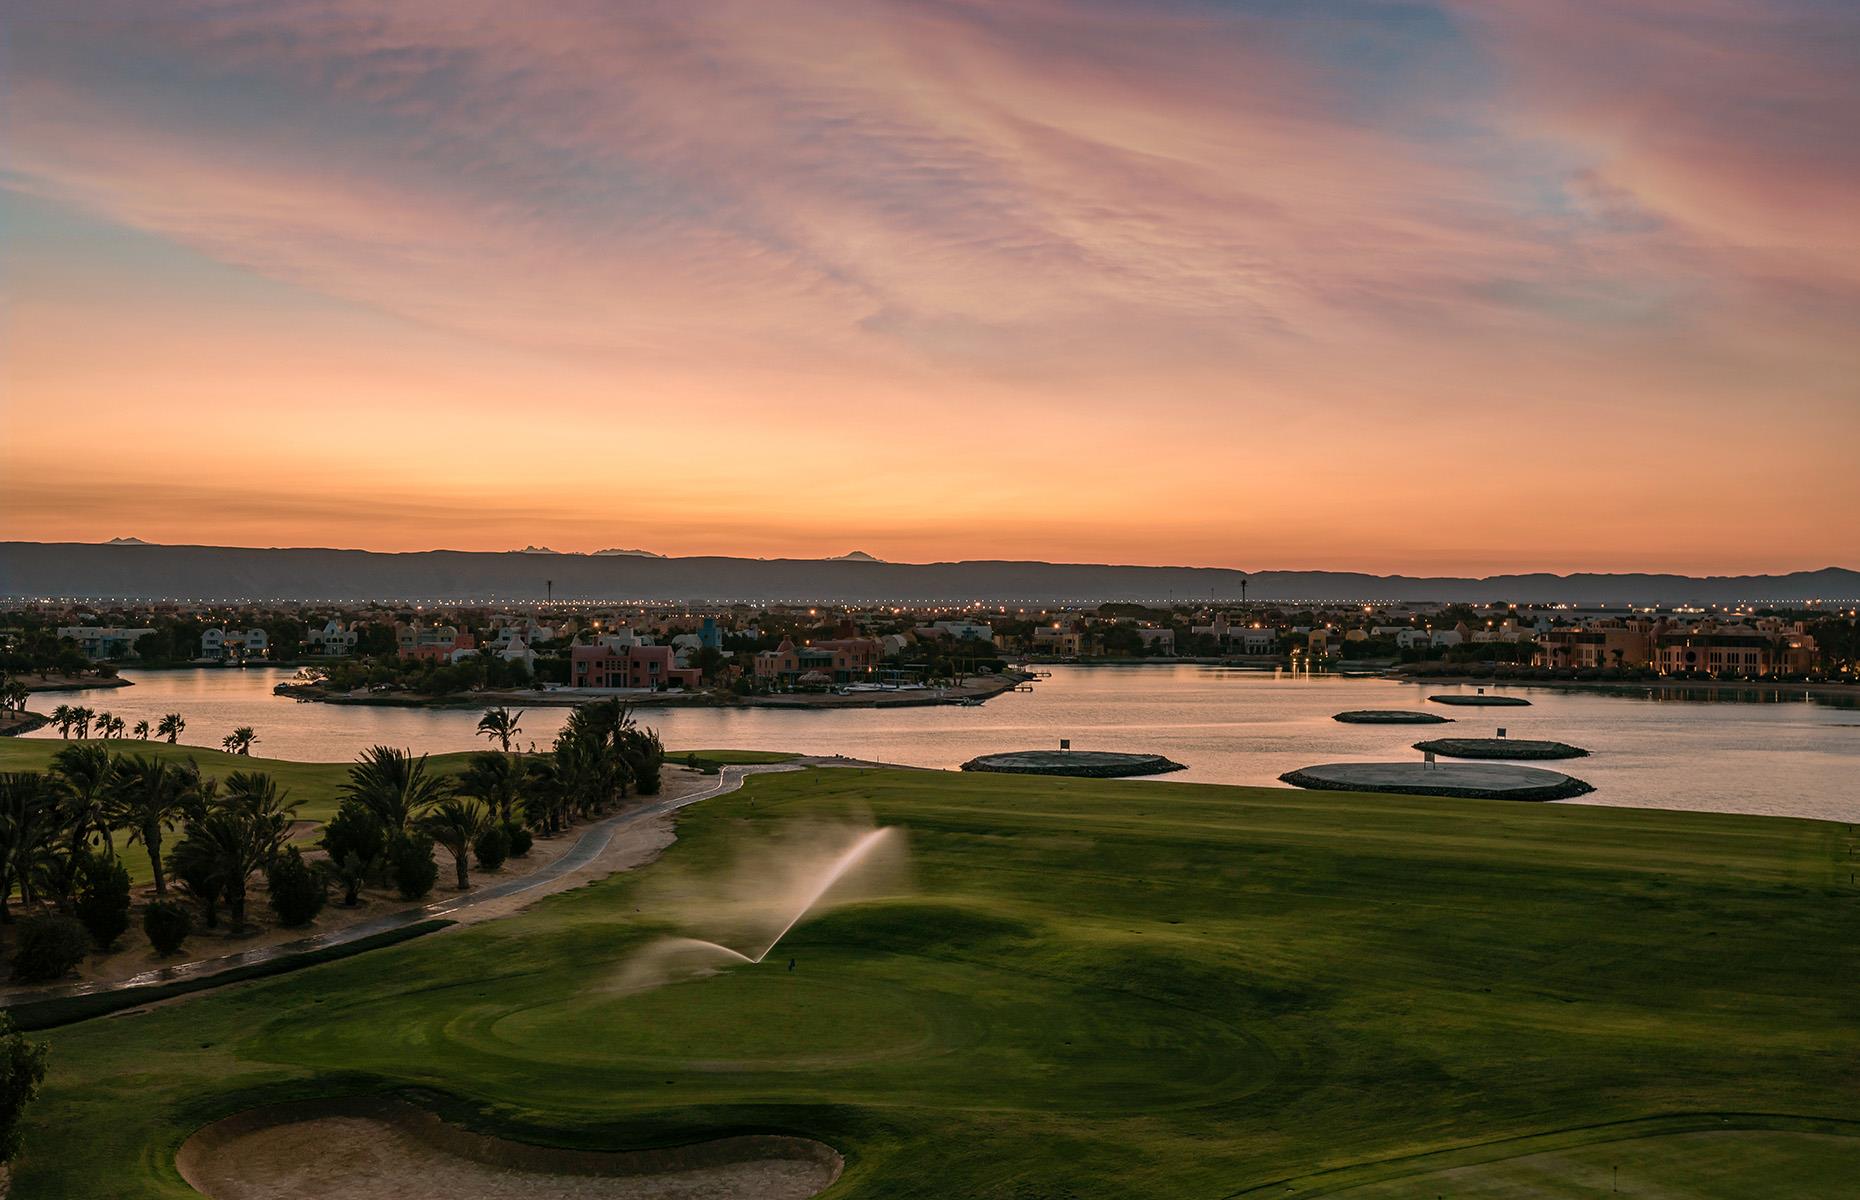 <p>On the golf course (and open to all, regardless of whether you’re staying at this hotel) is the town’s highest viewpoint, the Steigenberger Golf Tower. Sometimes simply called El Gouna Tower, it stands at a relatively lofty 36 feet (11m) and offers 360-degree views from its wraparound deck at the top. Come just before sunset, grab a cocktail from the downstairs bar, and watch the lagoons, islands and elegant villas get drenched in apricot light. You might notice the uniformity – buildings must stick to the 10 official colors, all muted, rich, earthy tones. Pictured is the view from the tower.</p>